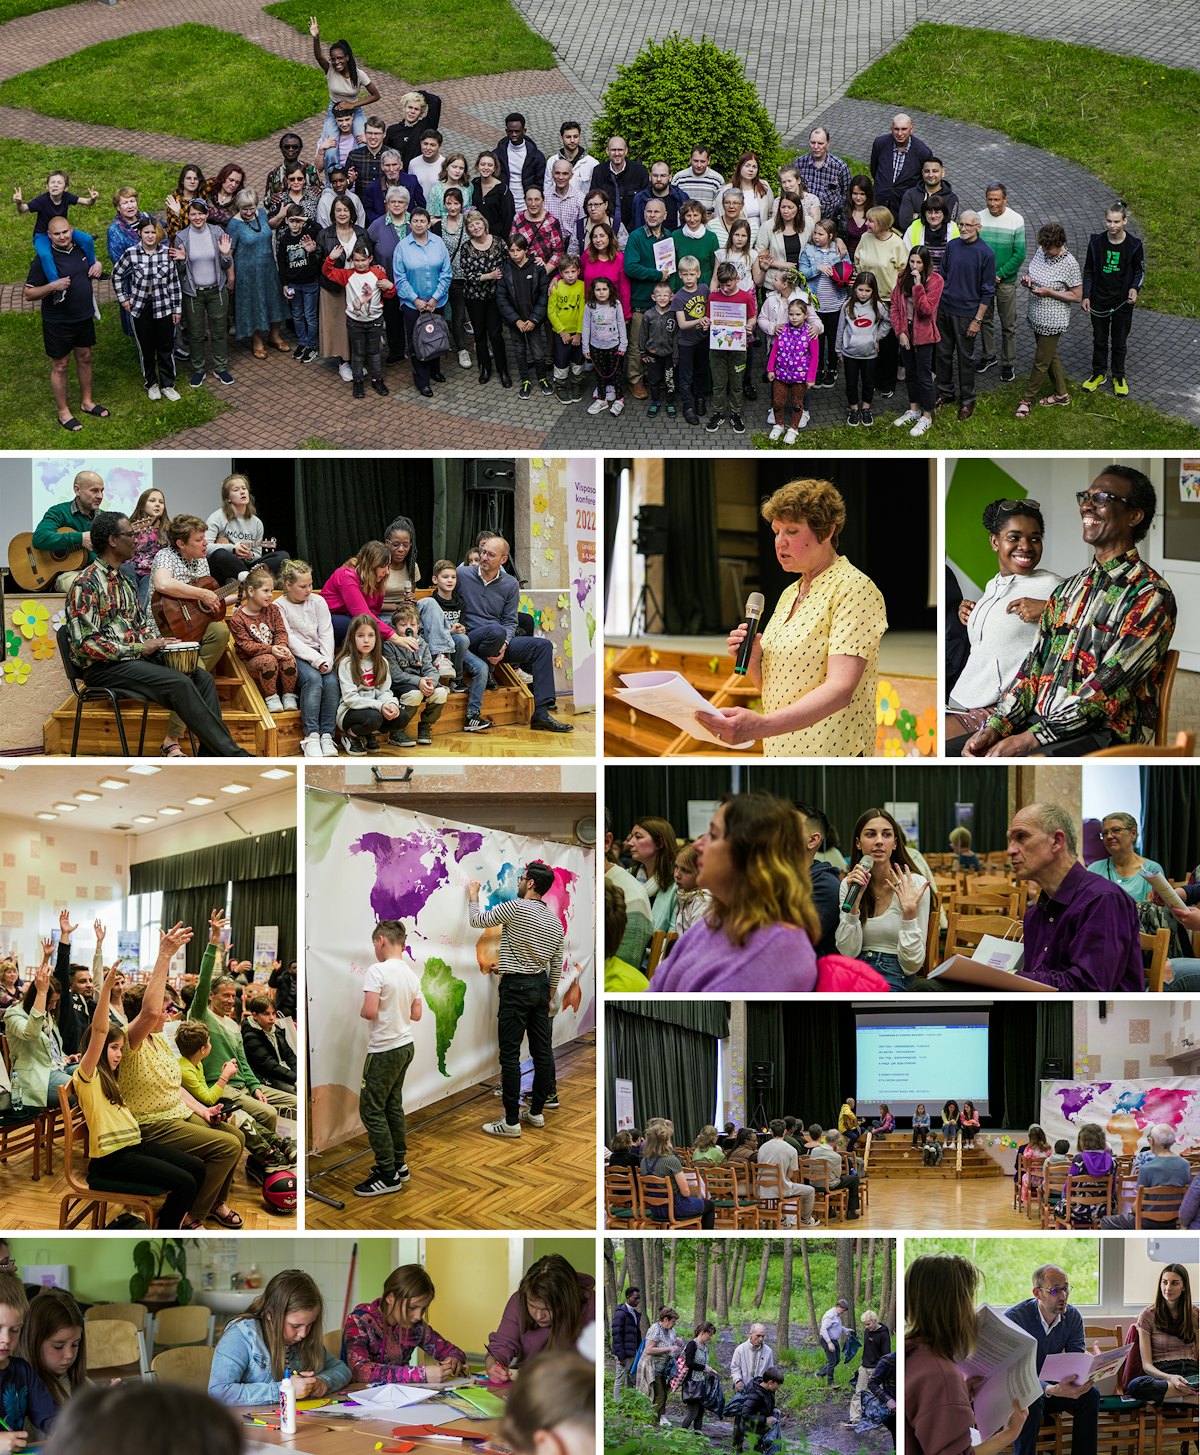 A conference in Riga, Latvia, included activities for social action, such as cleaning a nearby park.